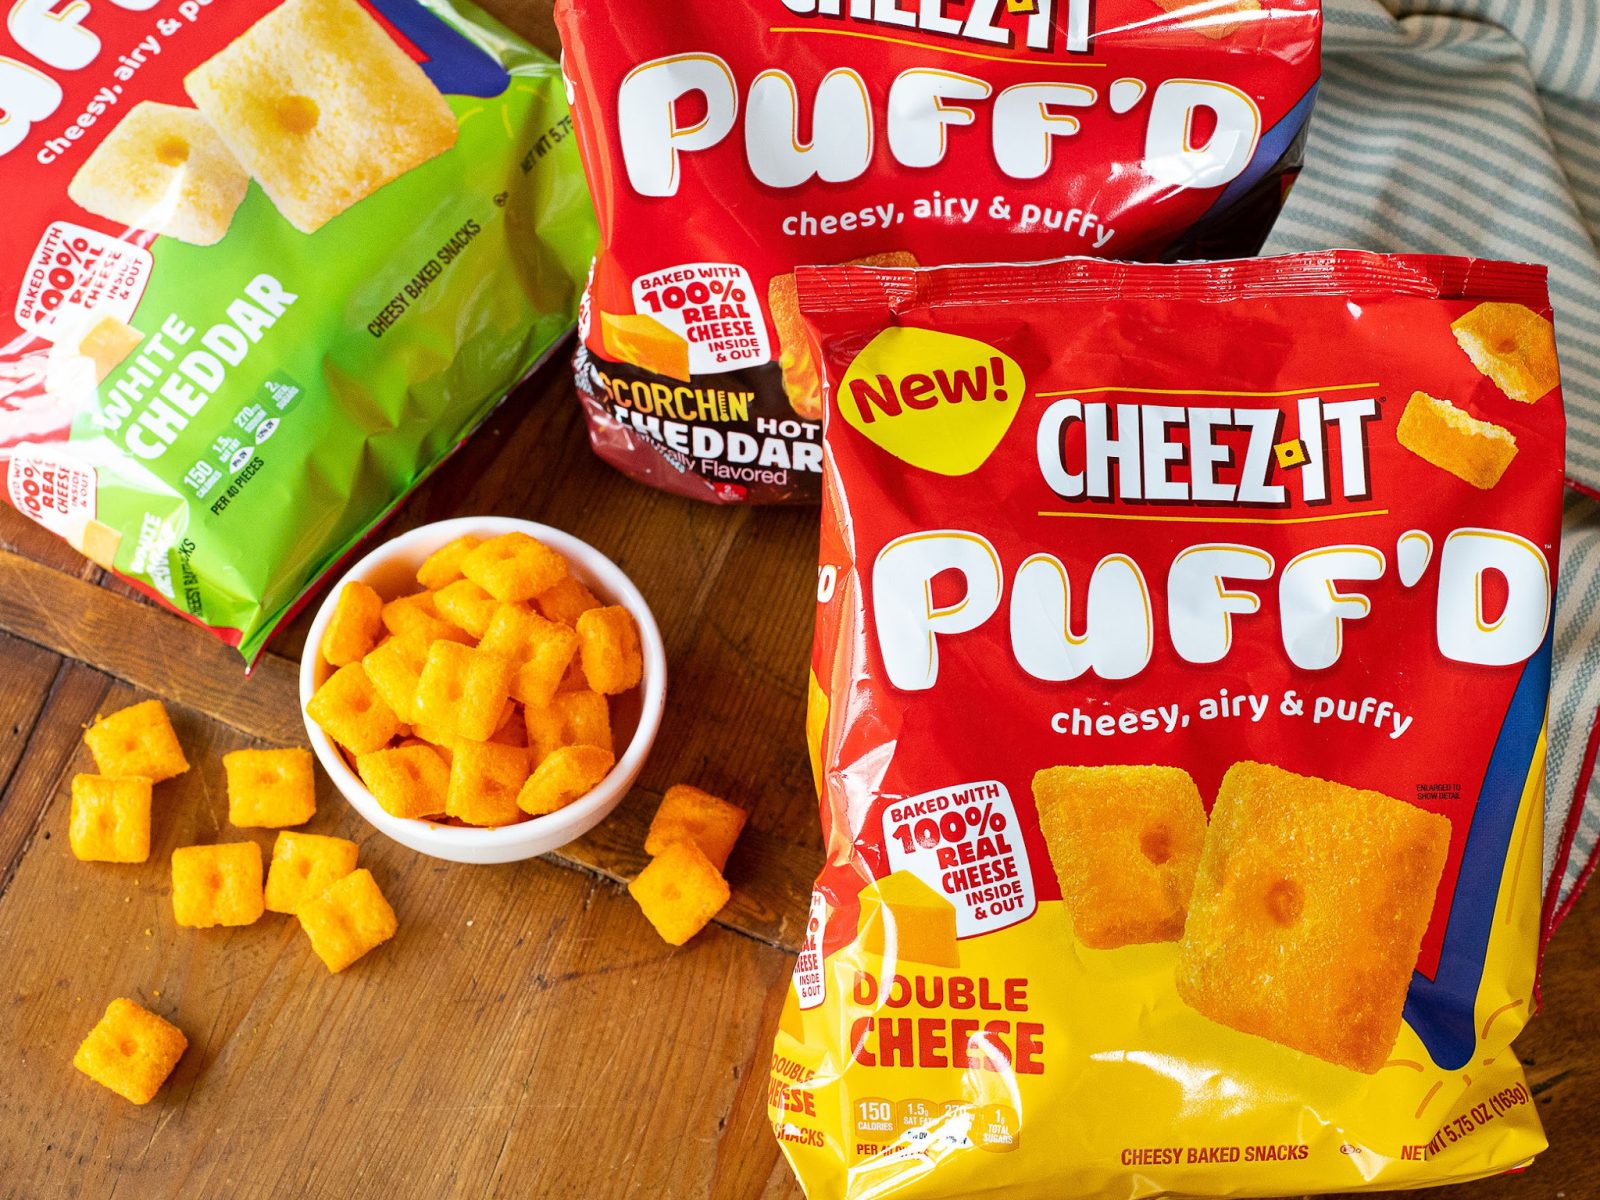 Cheez-It Puff’d Snacks As Low As $2.49 At Kroger – Half Price!